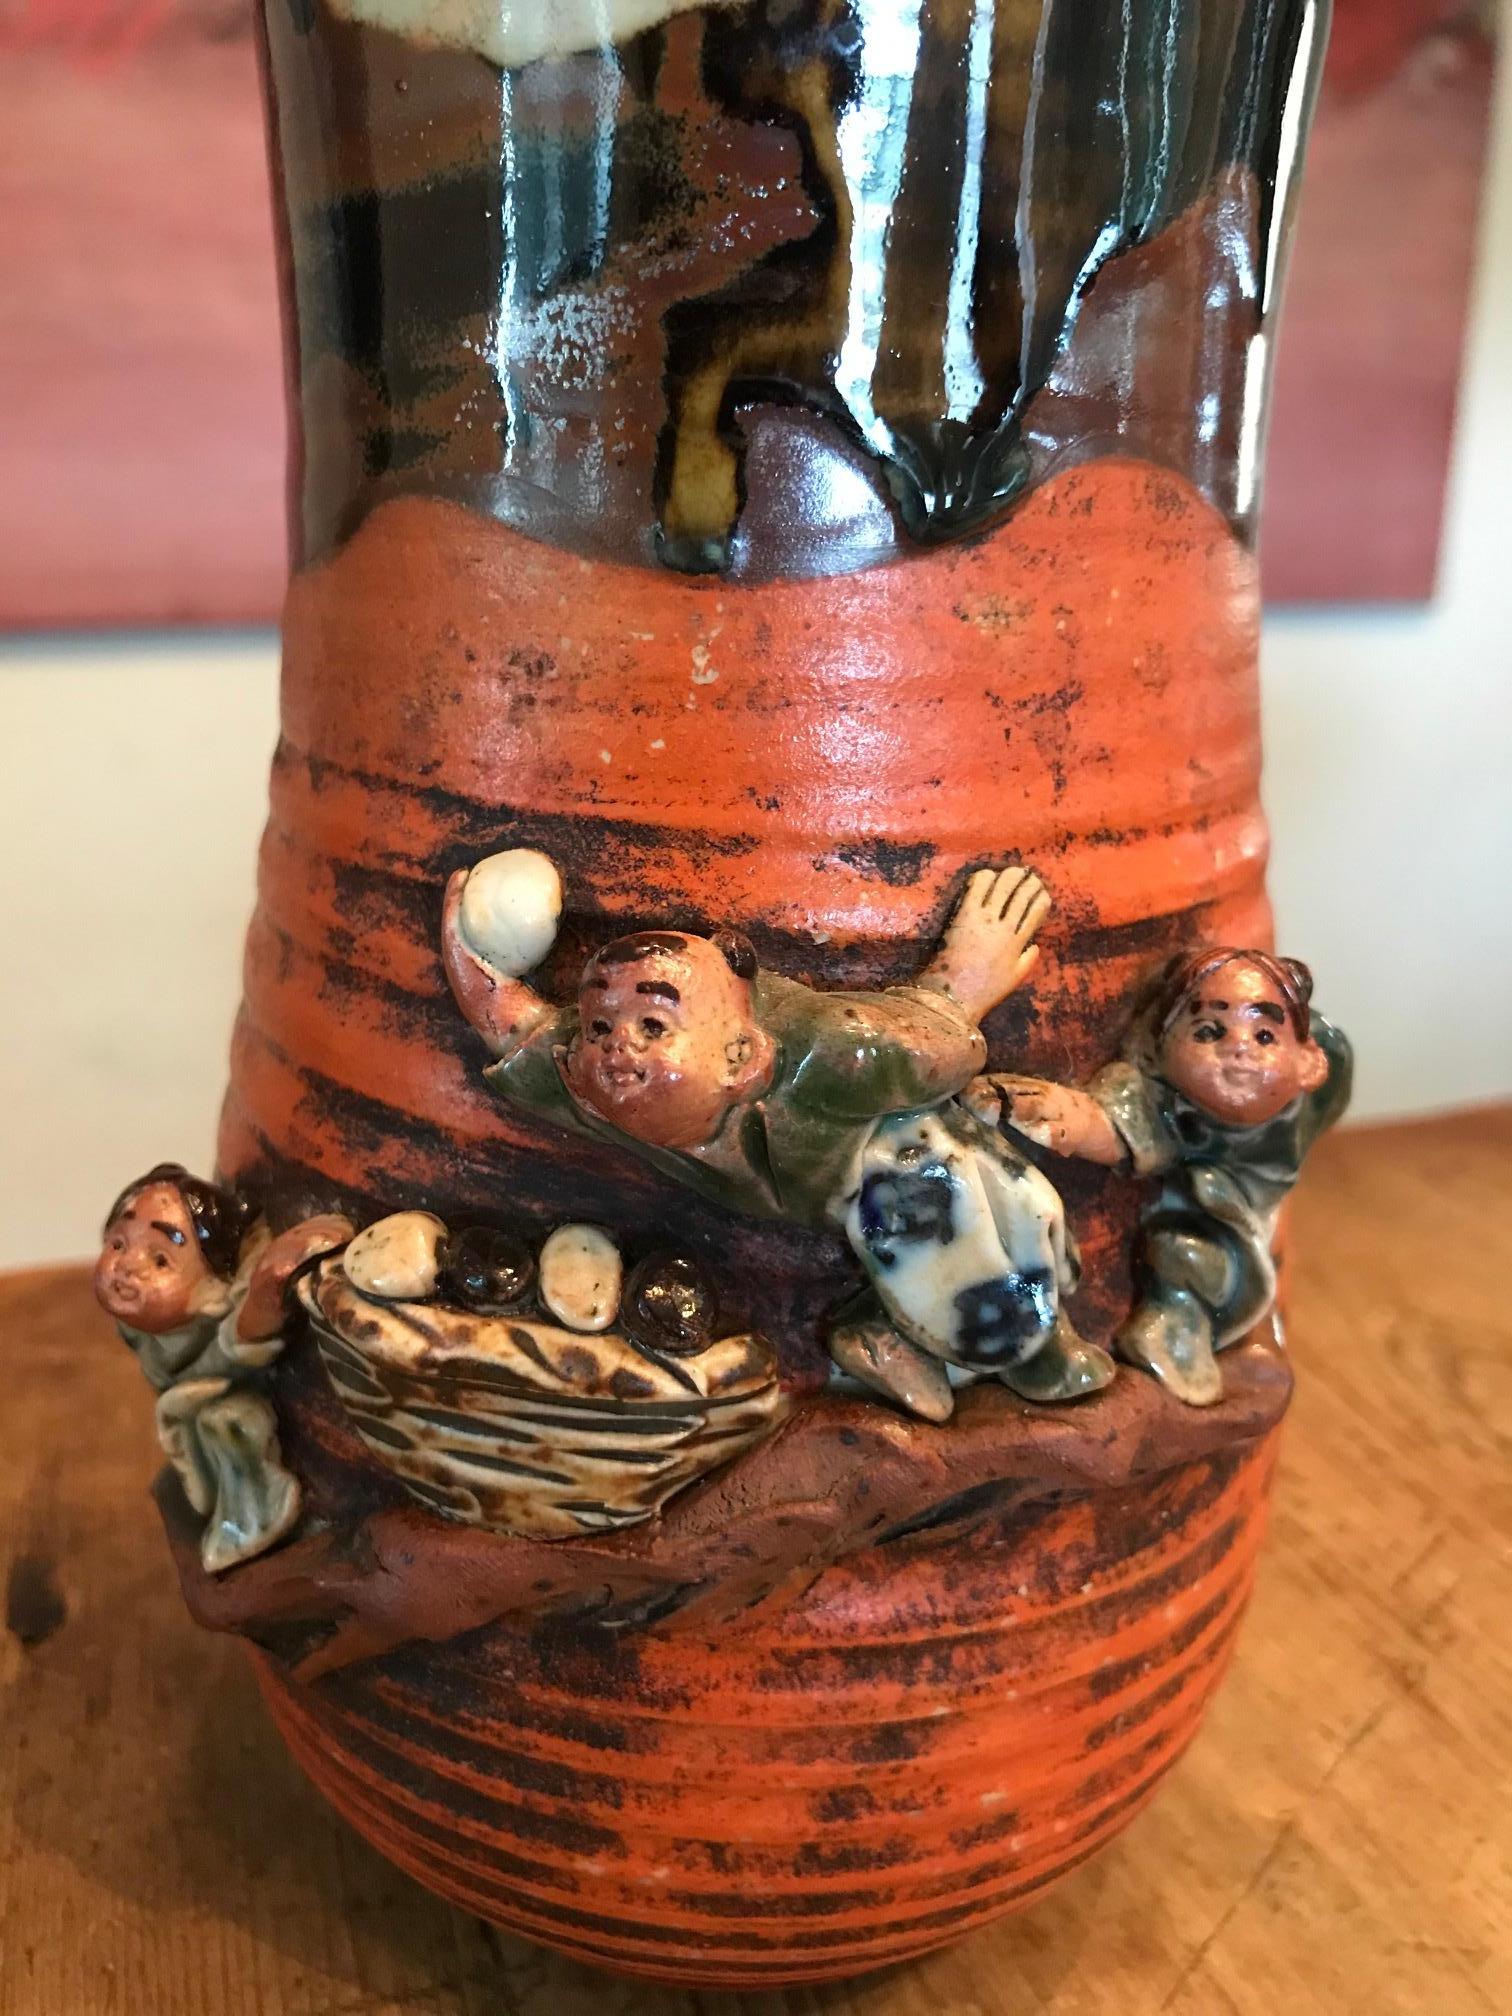 A fantastic Japanese Sumida Gawa vase, circa late 1800s-early 1900s depicting playing village children.

Signed on base.

Dimensions: 9